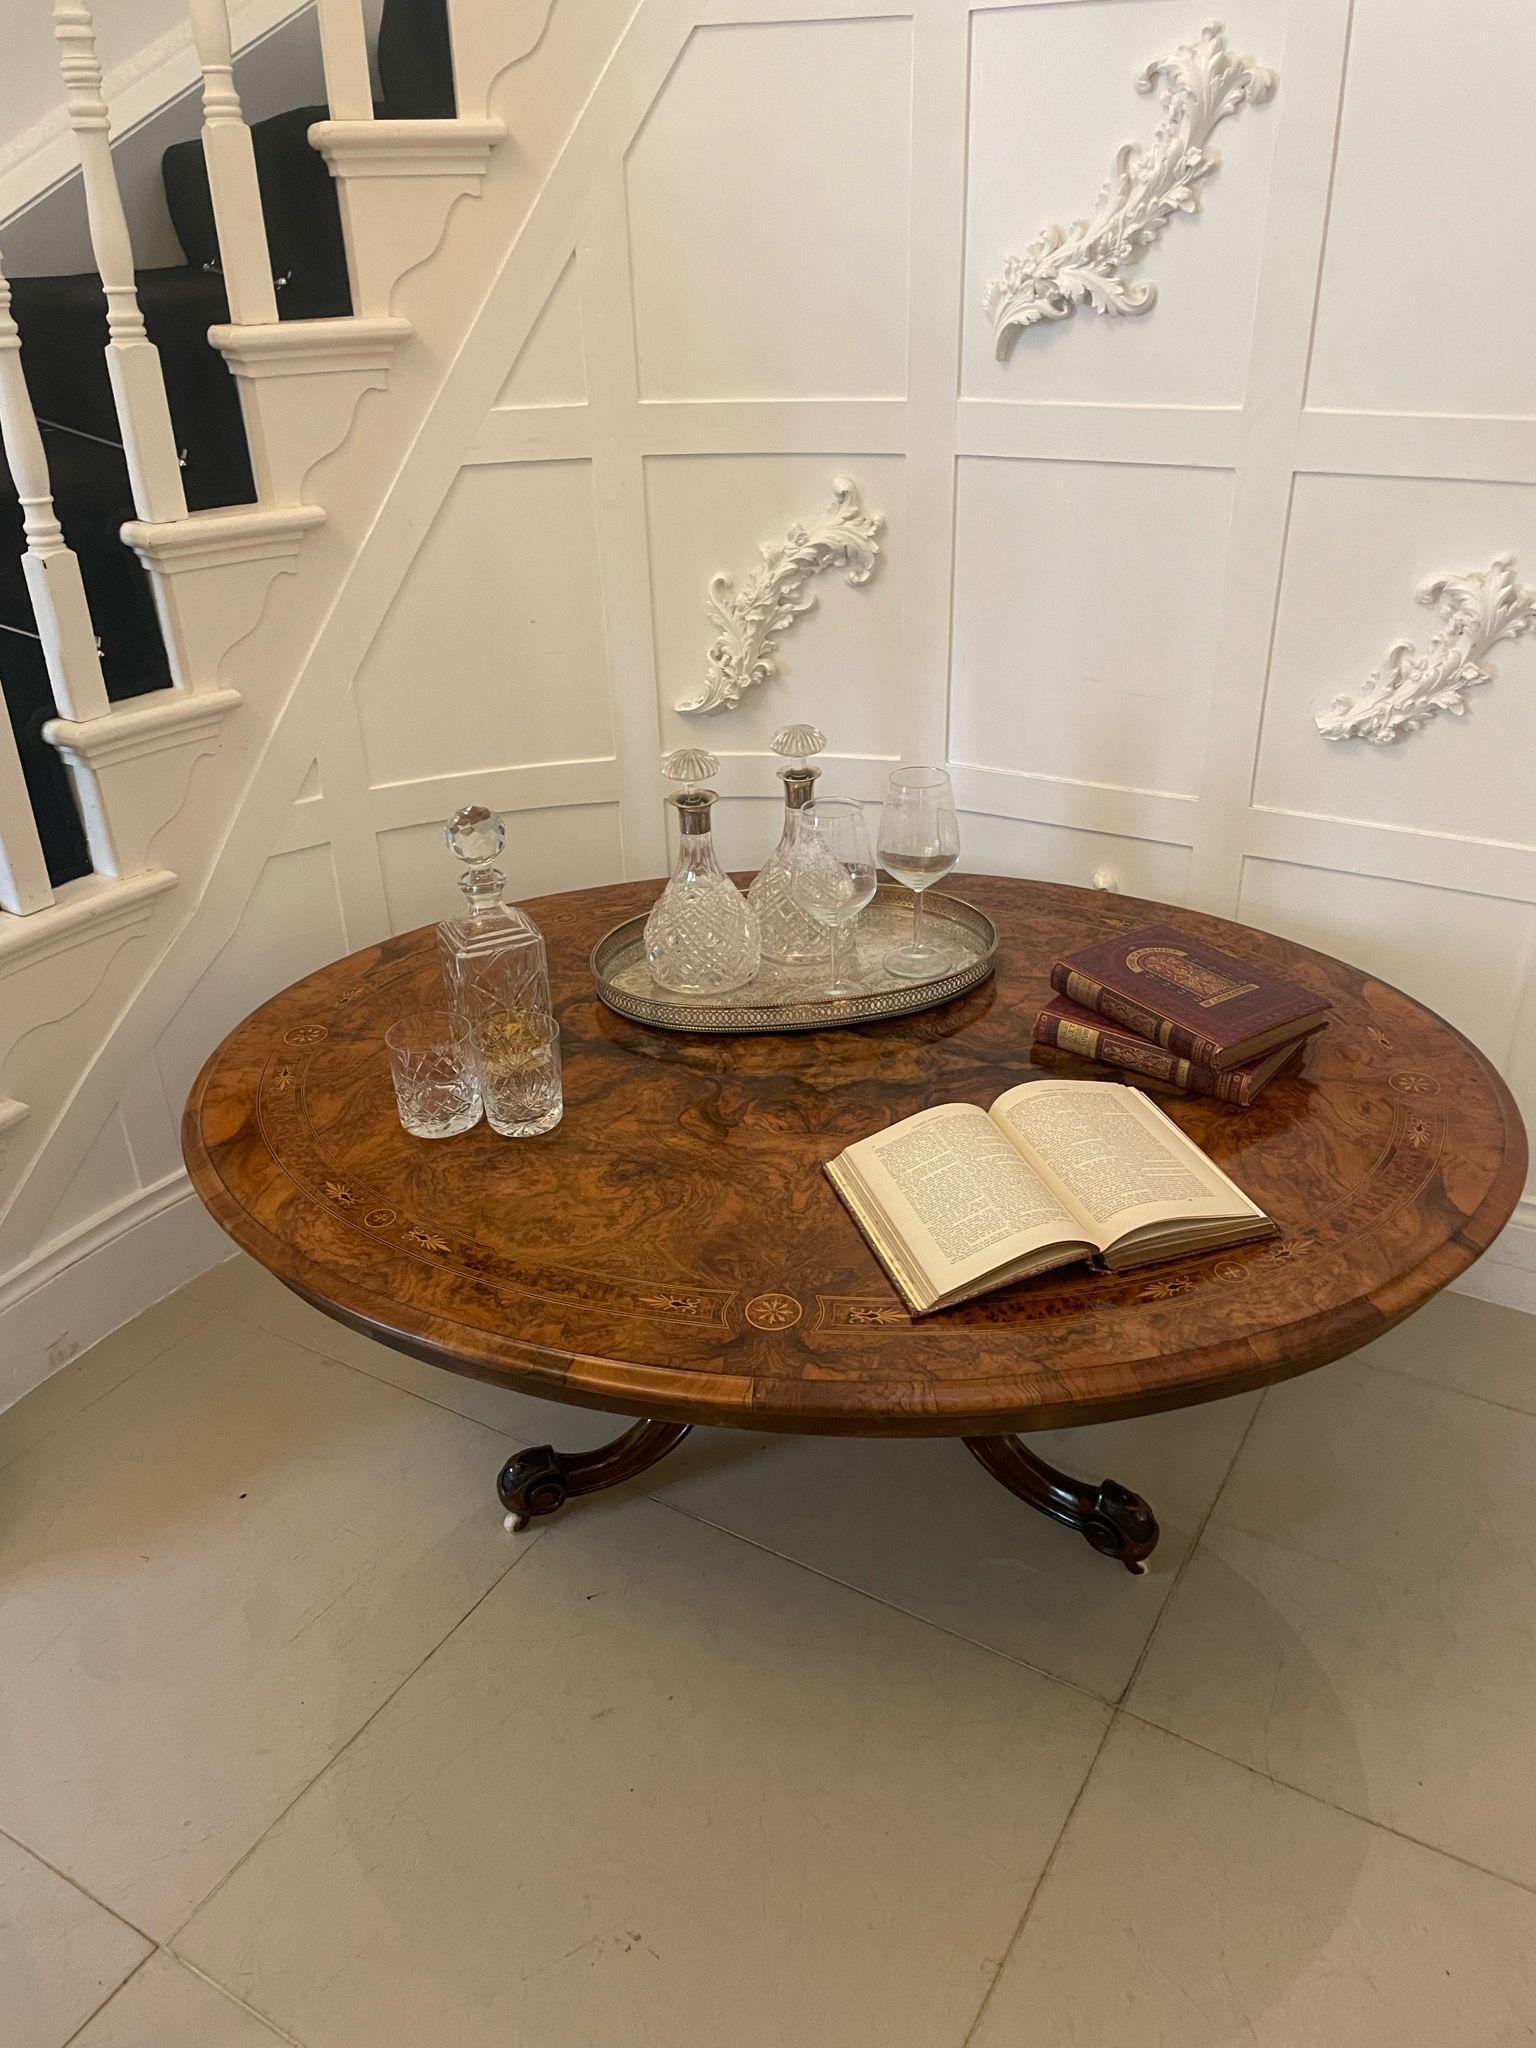 Outstanding quality antique Victorian burr walnut inlaid oval coffee table having a magnificent quality burr walnut inlaid oval shaped top with a thumb moulded edge supported by a turned carved solid walnut pedestal column standing on four shaped